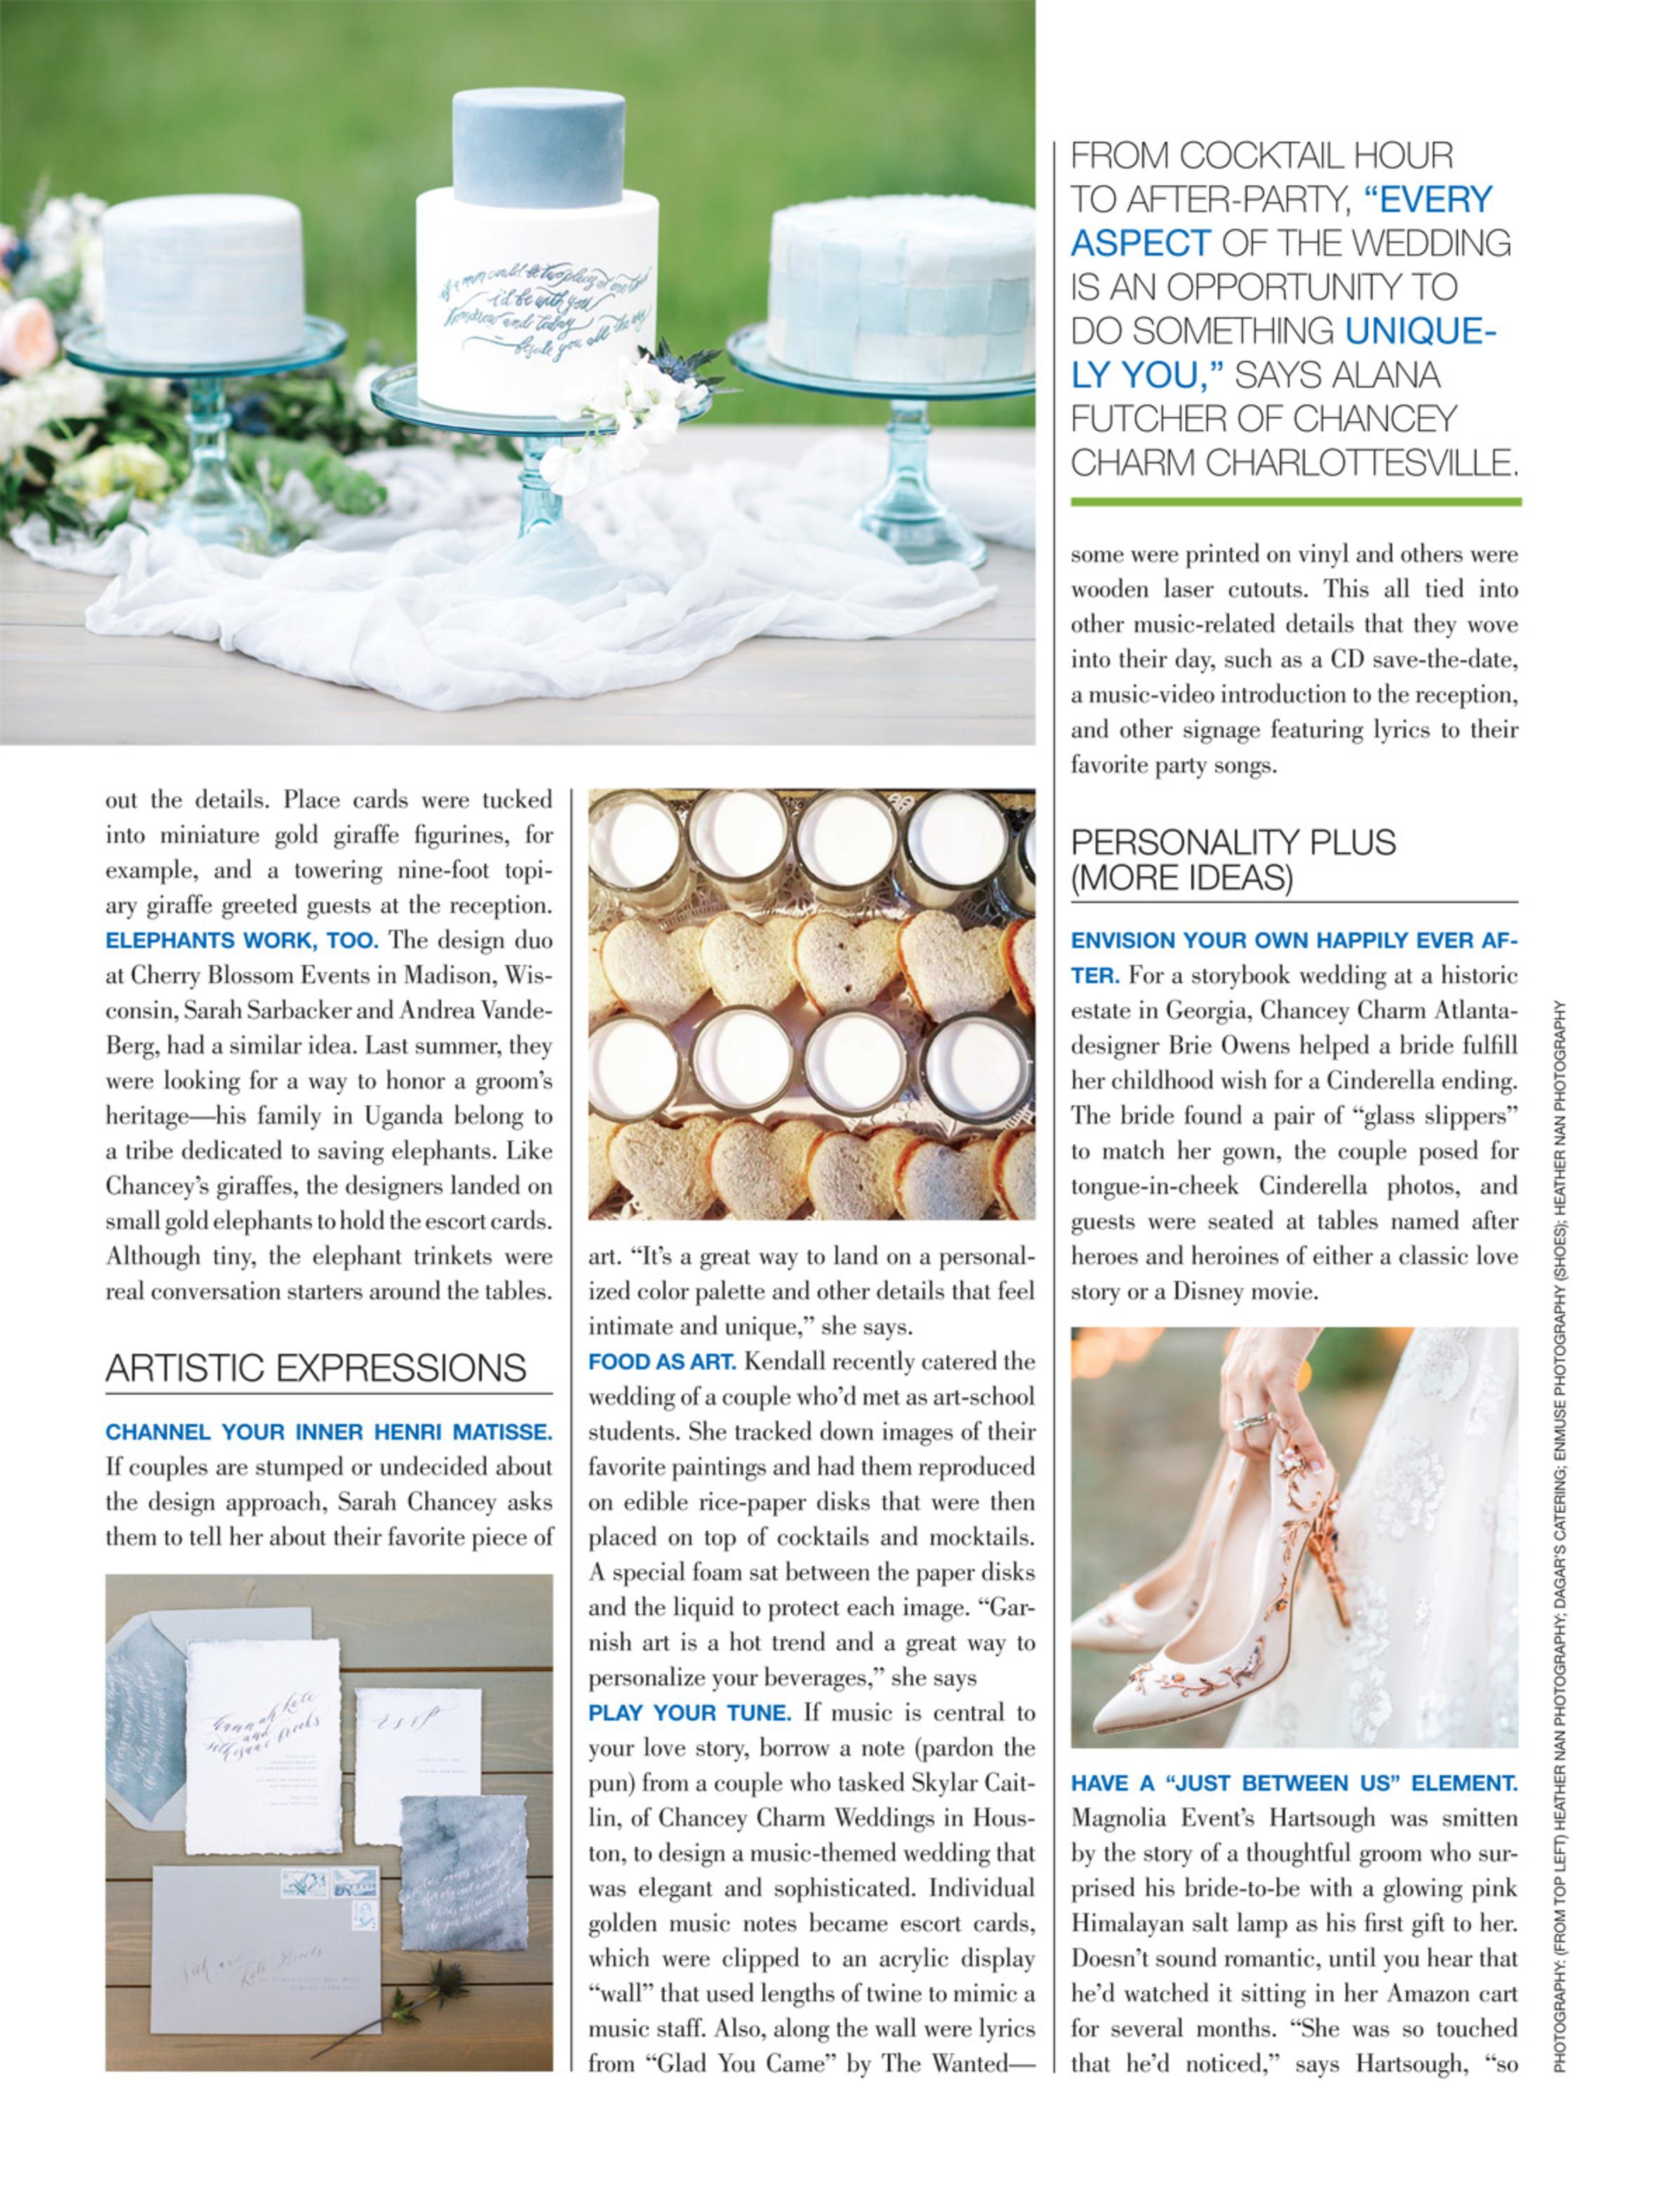 Bridal Guide Magazine Feature | Personalizing Your Wedding | Michelle Leo Events | Utah Event Planner and Designer 